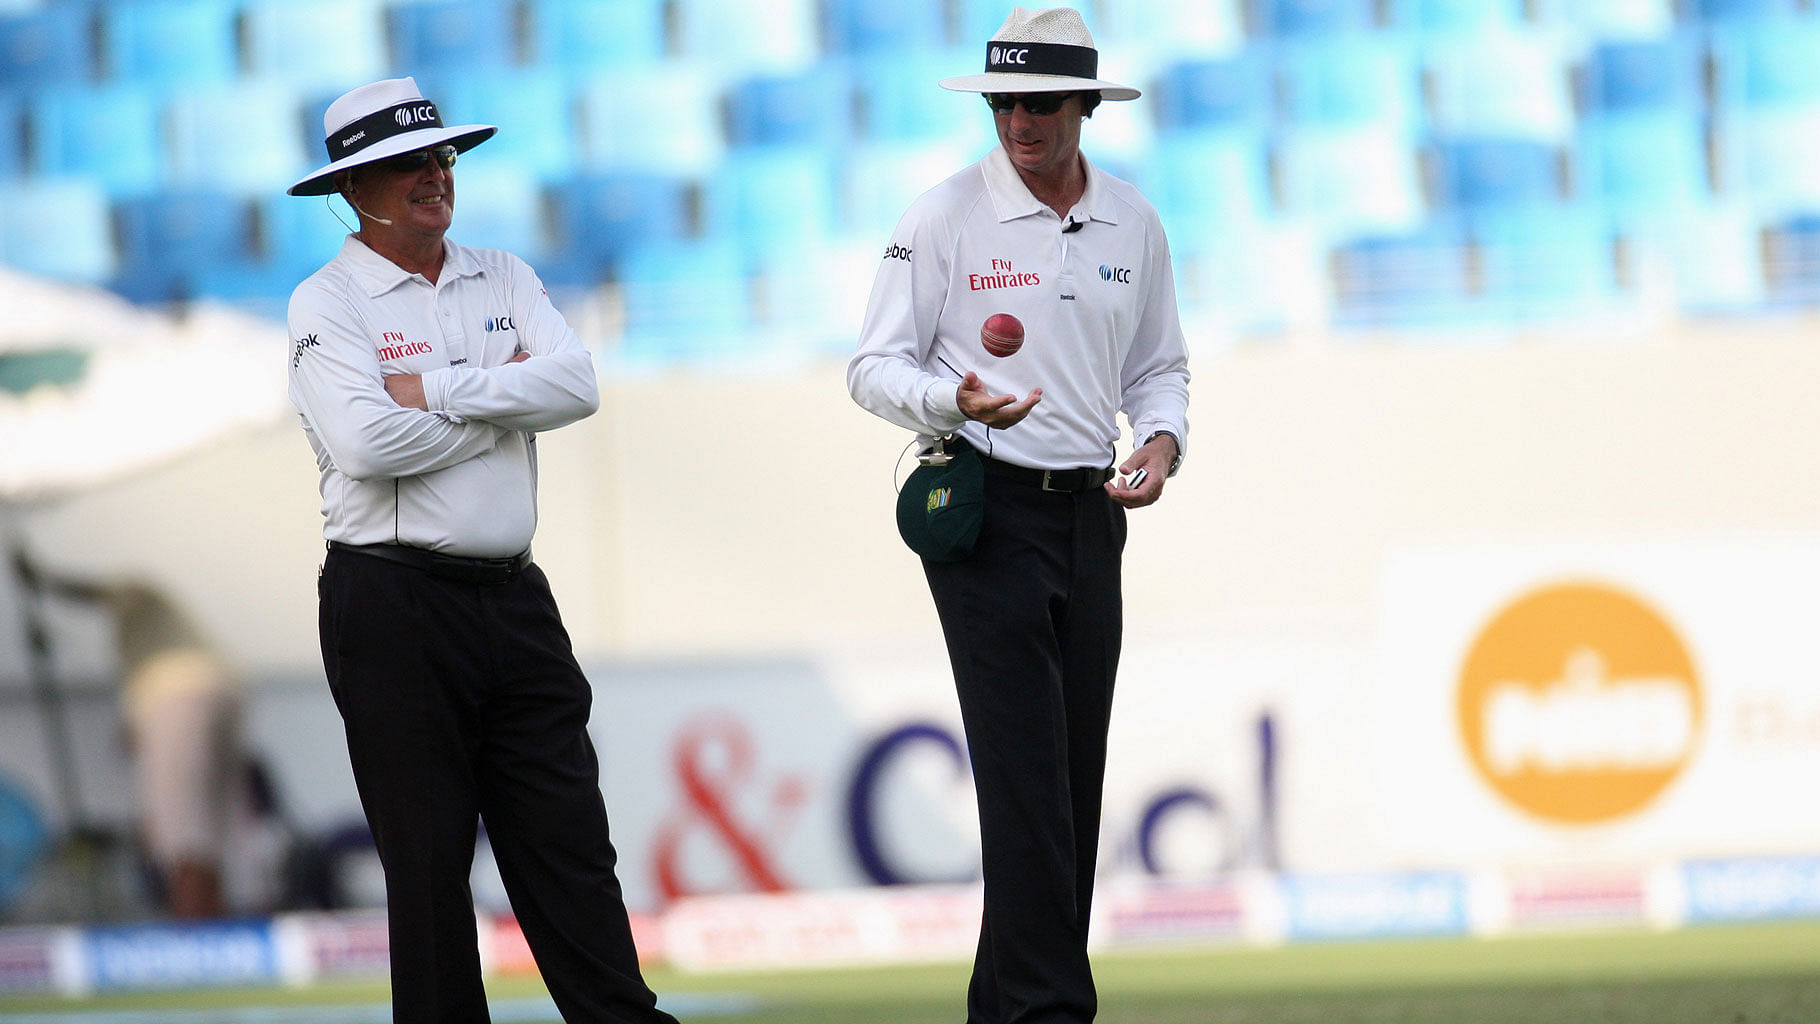 In the ODI series between Pakistan and England, the TV umpire or the 3rd umpire will take a call on the no-balls. (Photo: Reuters)